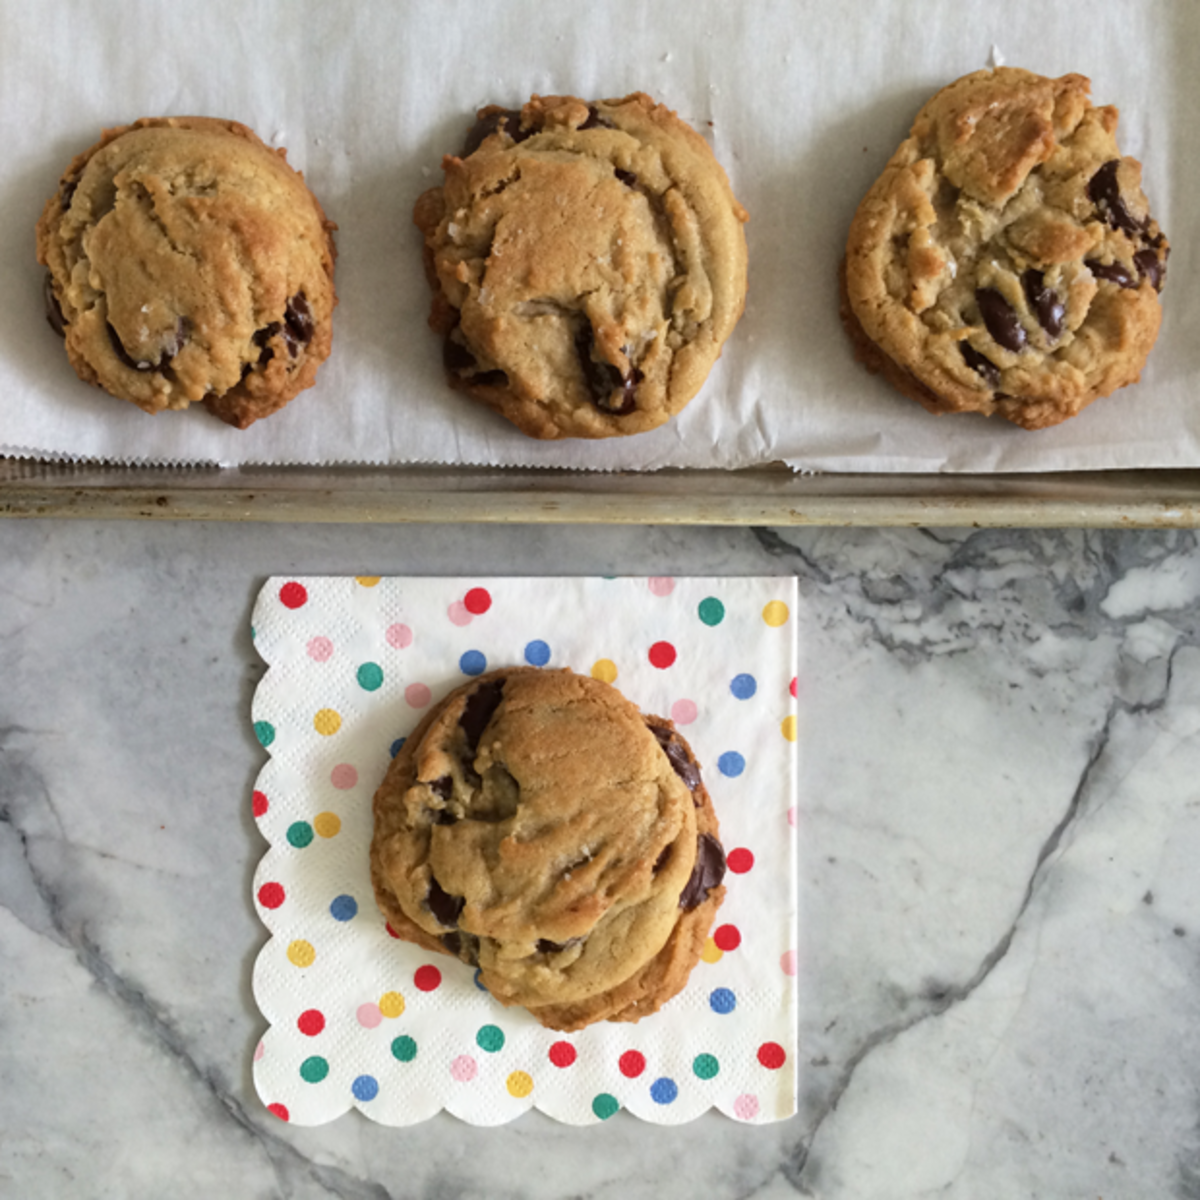 {Chocolate chip cookies that we keep frozen for whenever cravings strike}